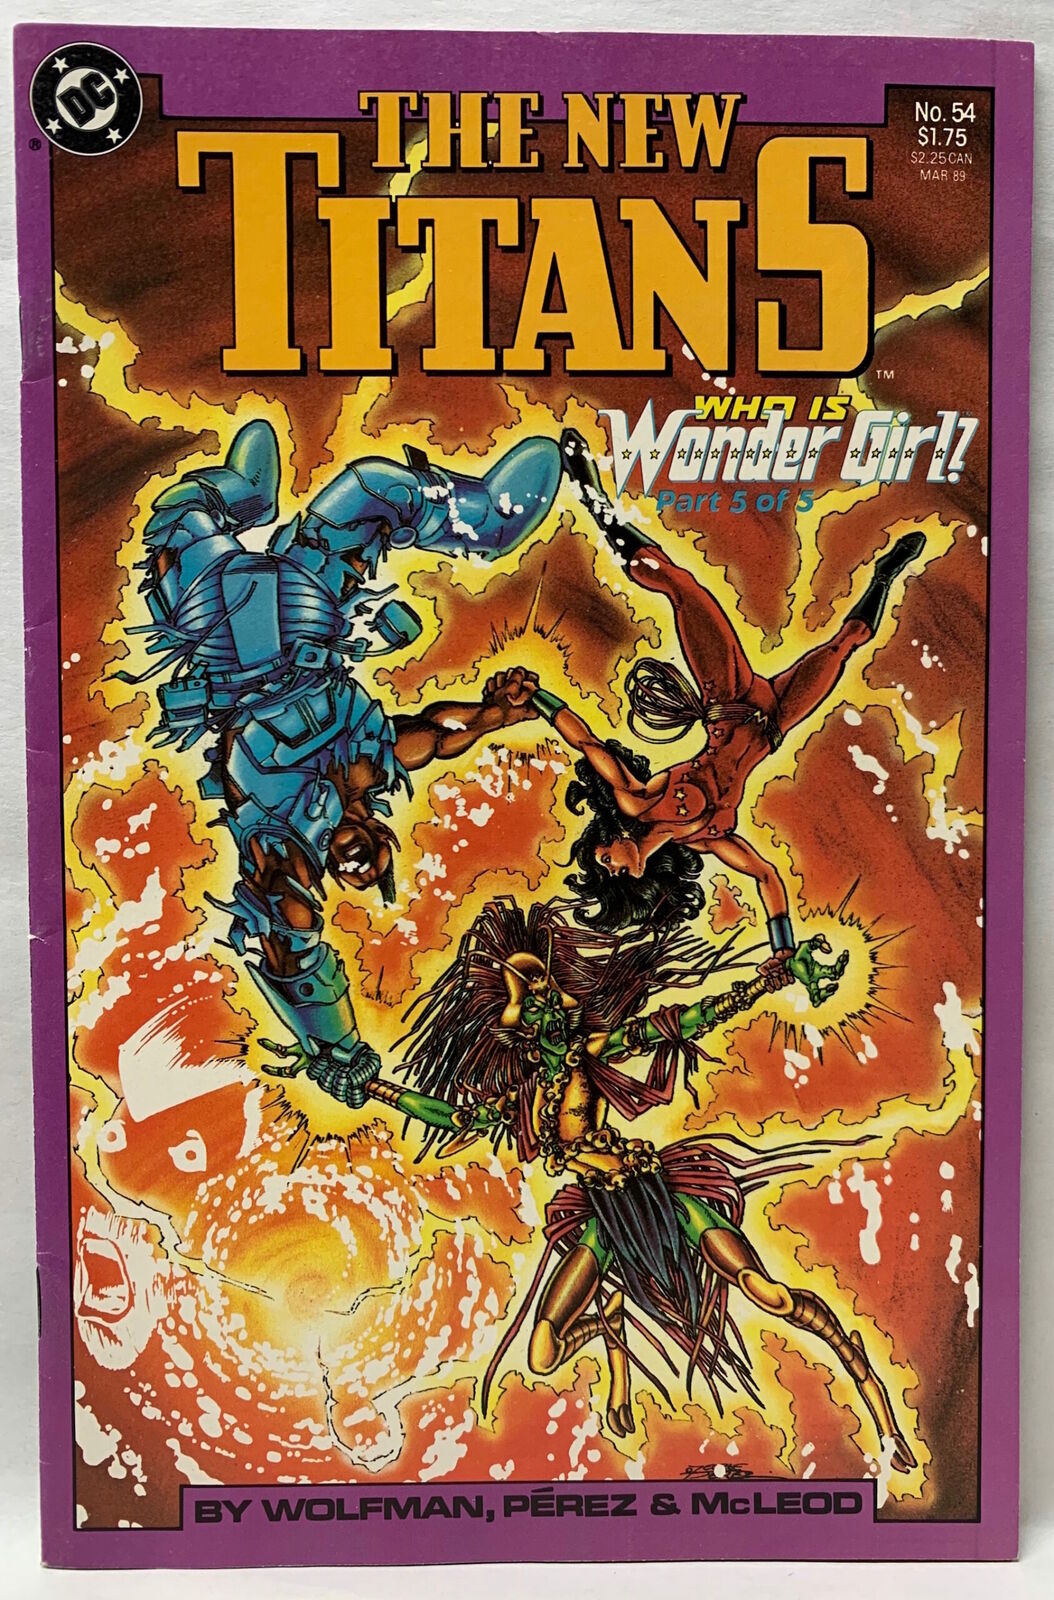 COMIC BOOK ~ THE NEW TITANS #54 WHO IS WONDER GIRL 5 0F 5